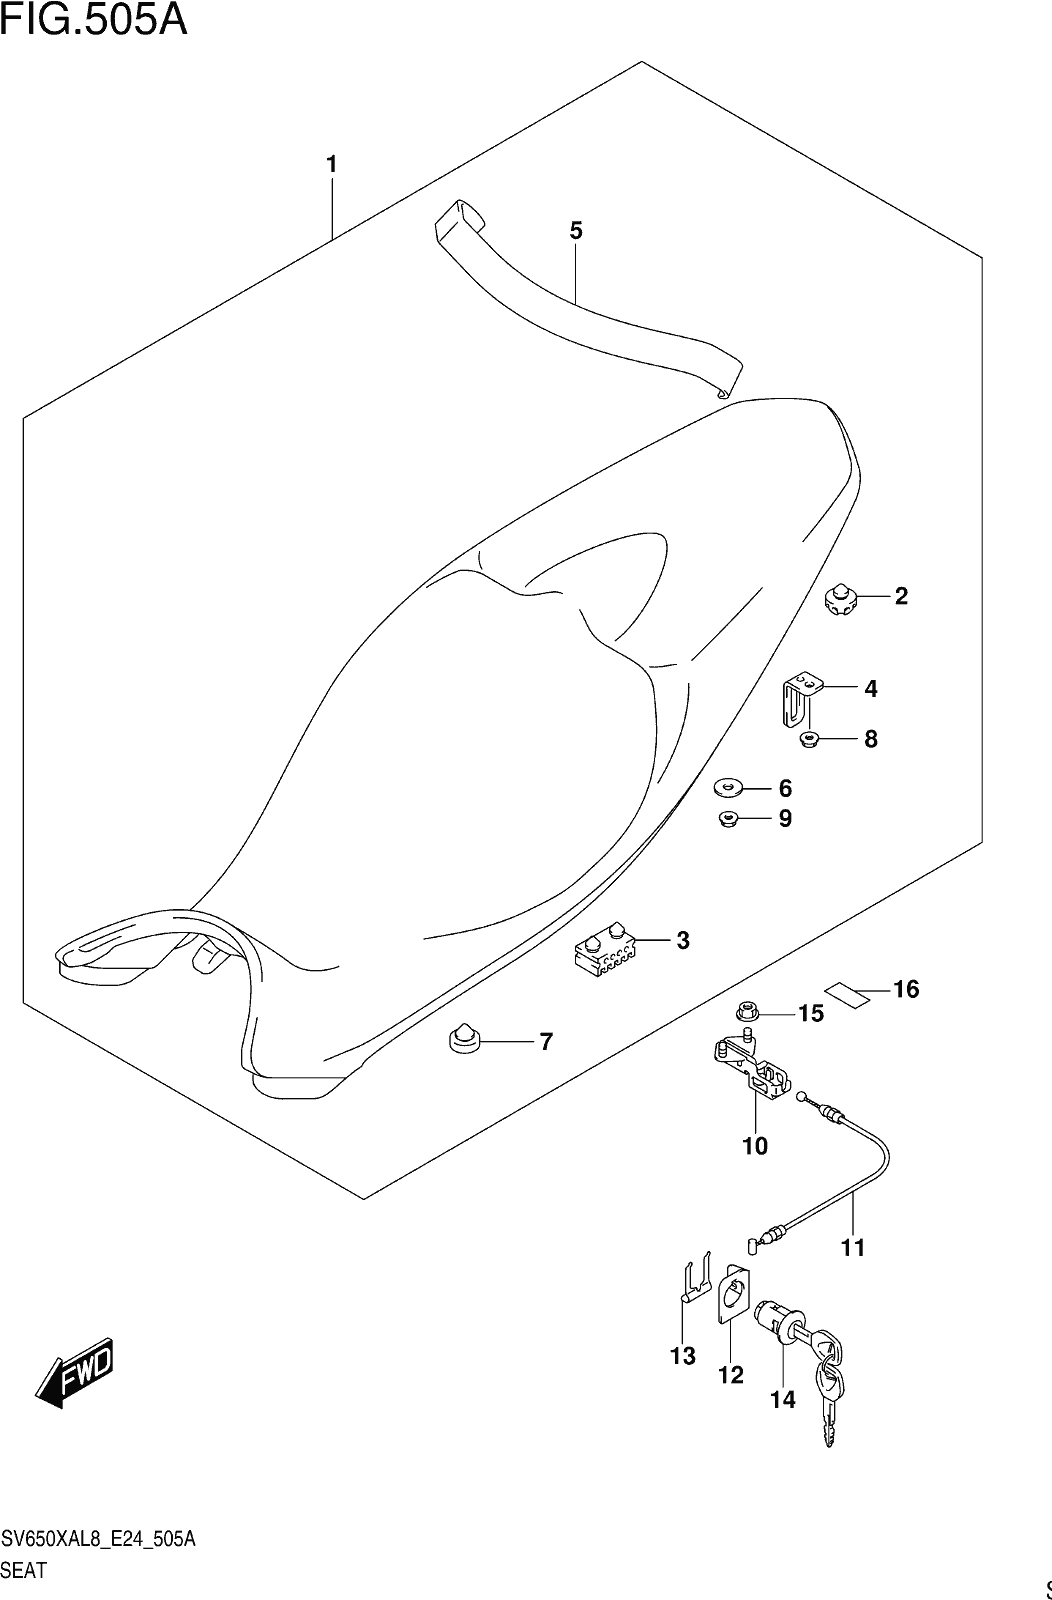 Fig.505a Seat